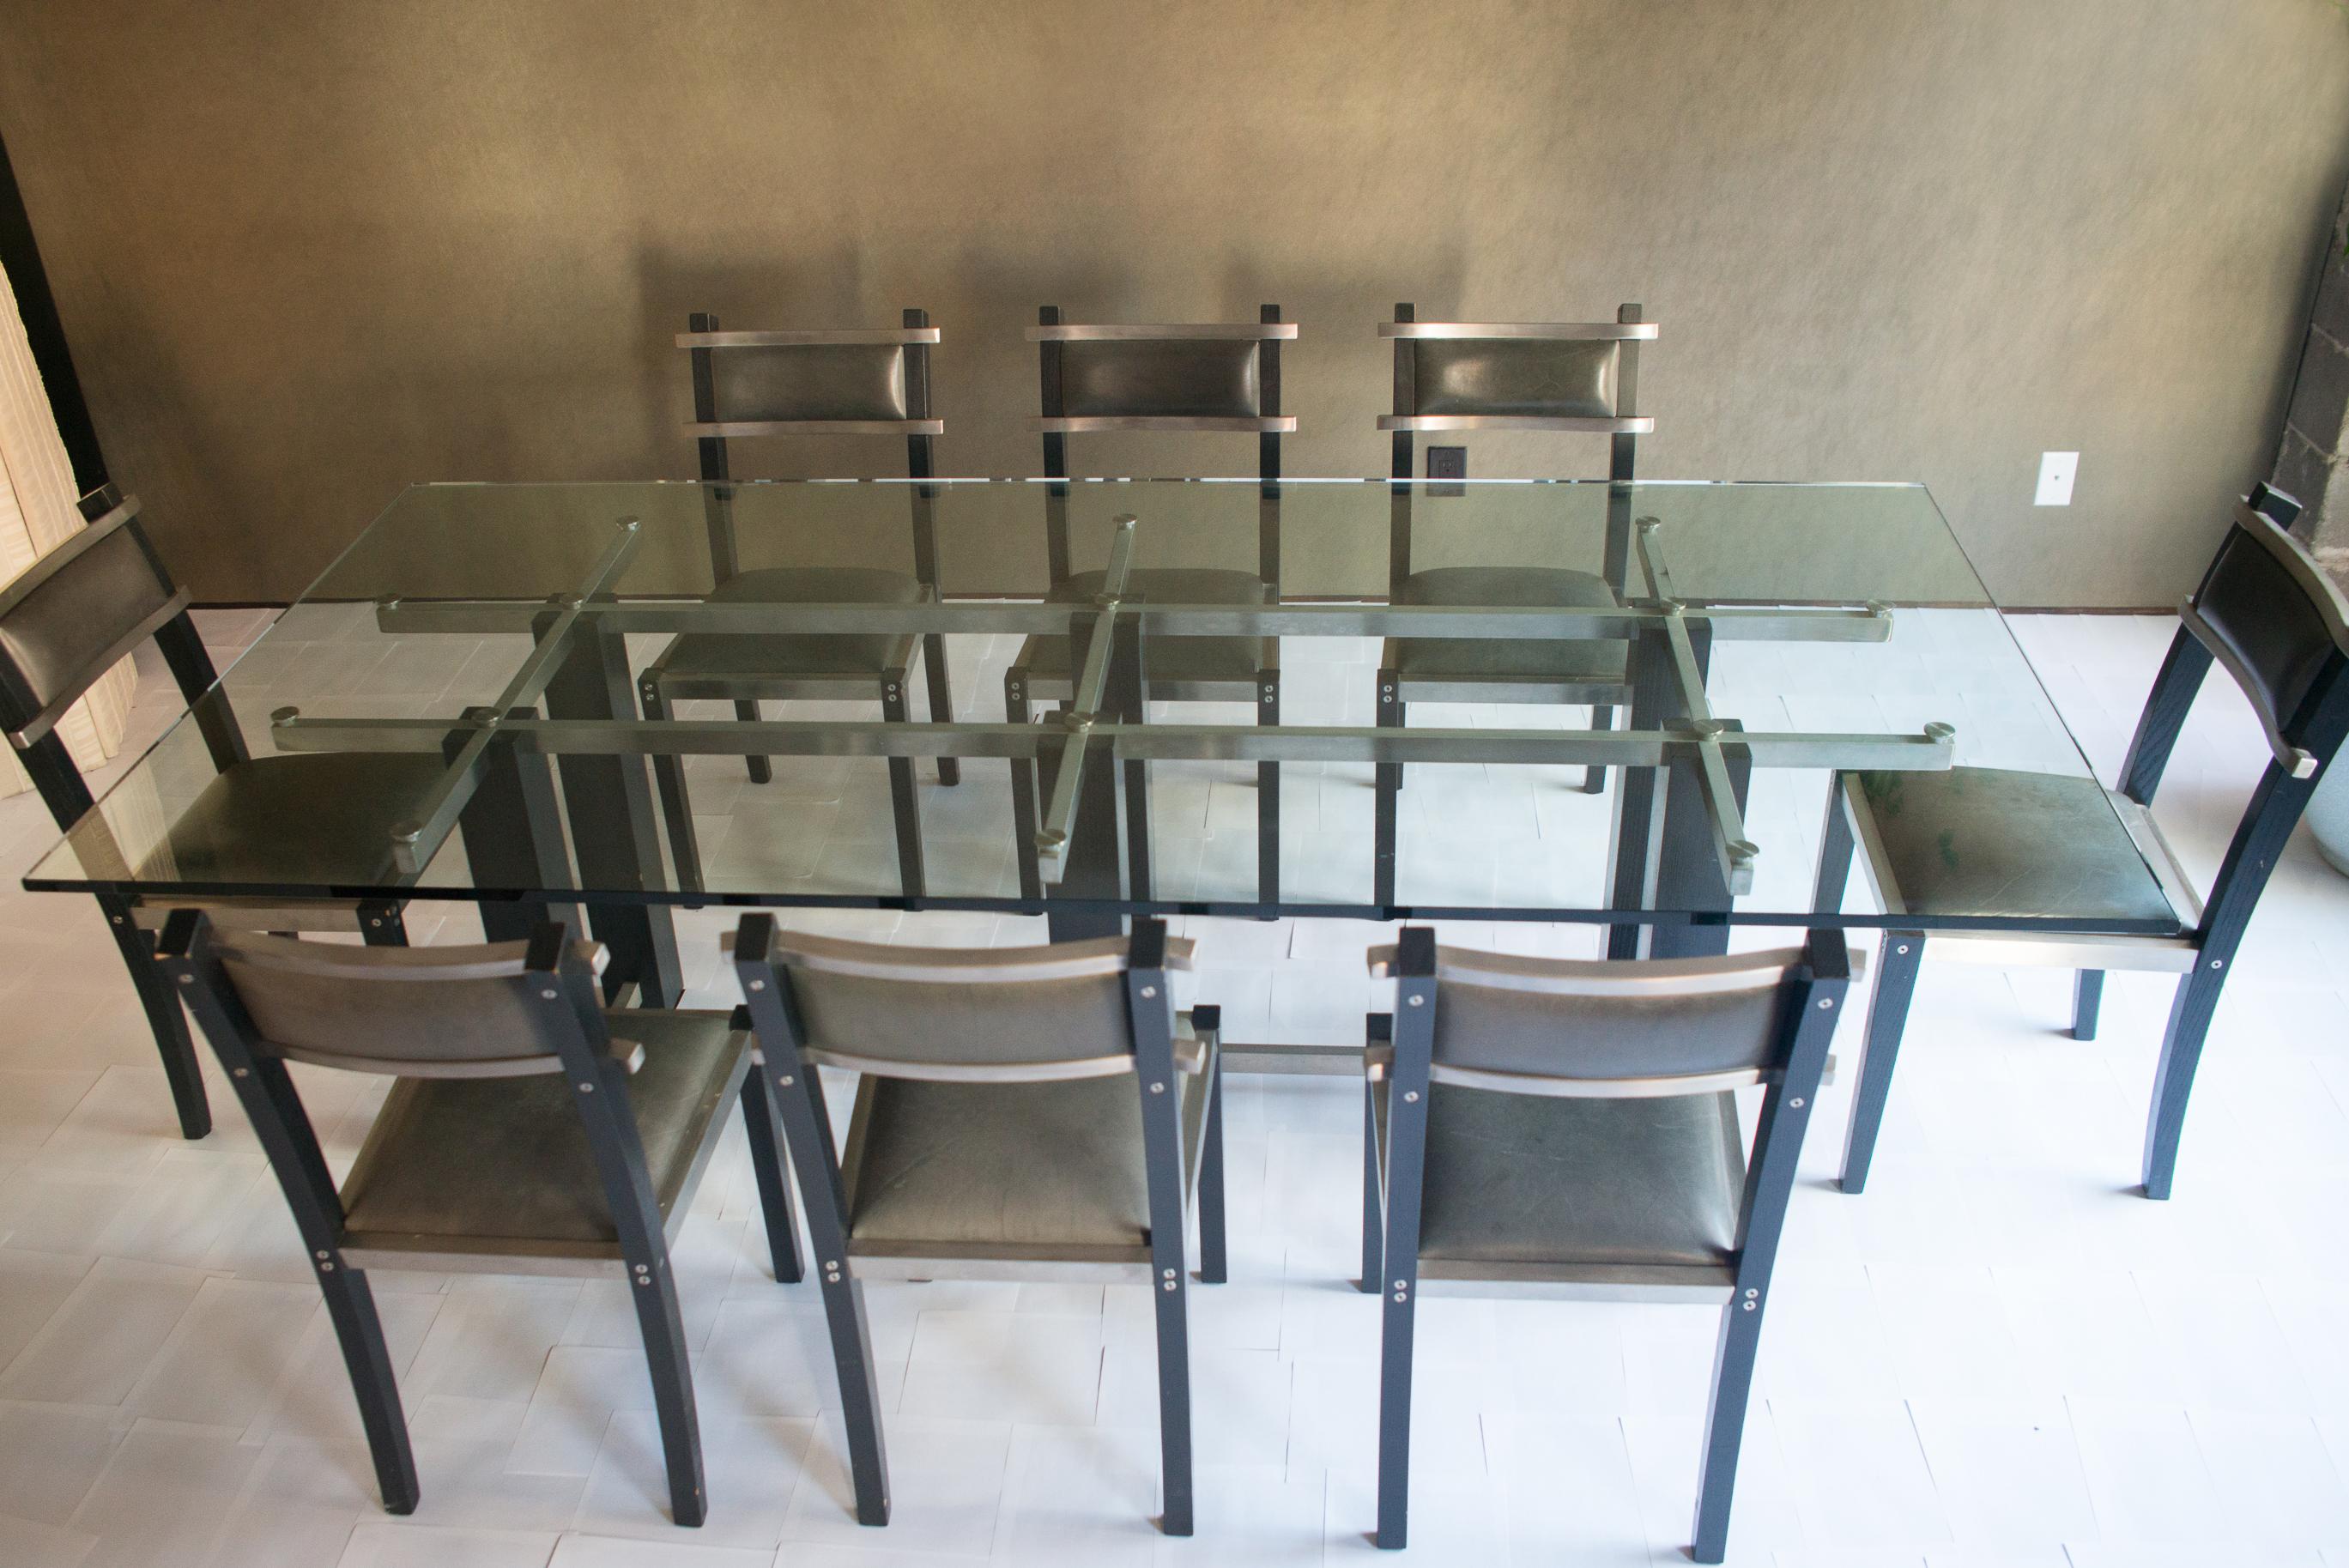 Sleek and shapely industrial style dining set. Solid maple frames and brushed stainless steel back slats give this set a sophisticated finish and attention to detail.f. Seats upholstered in Edelman leather.

Heltzer was founded in 1986 as a way to